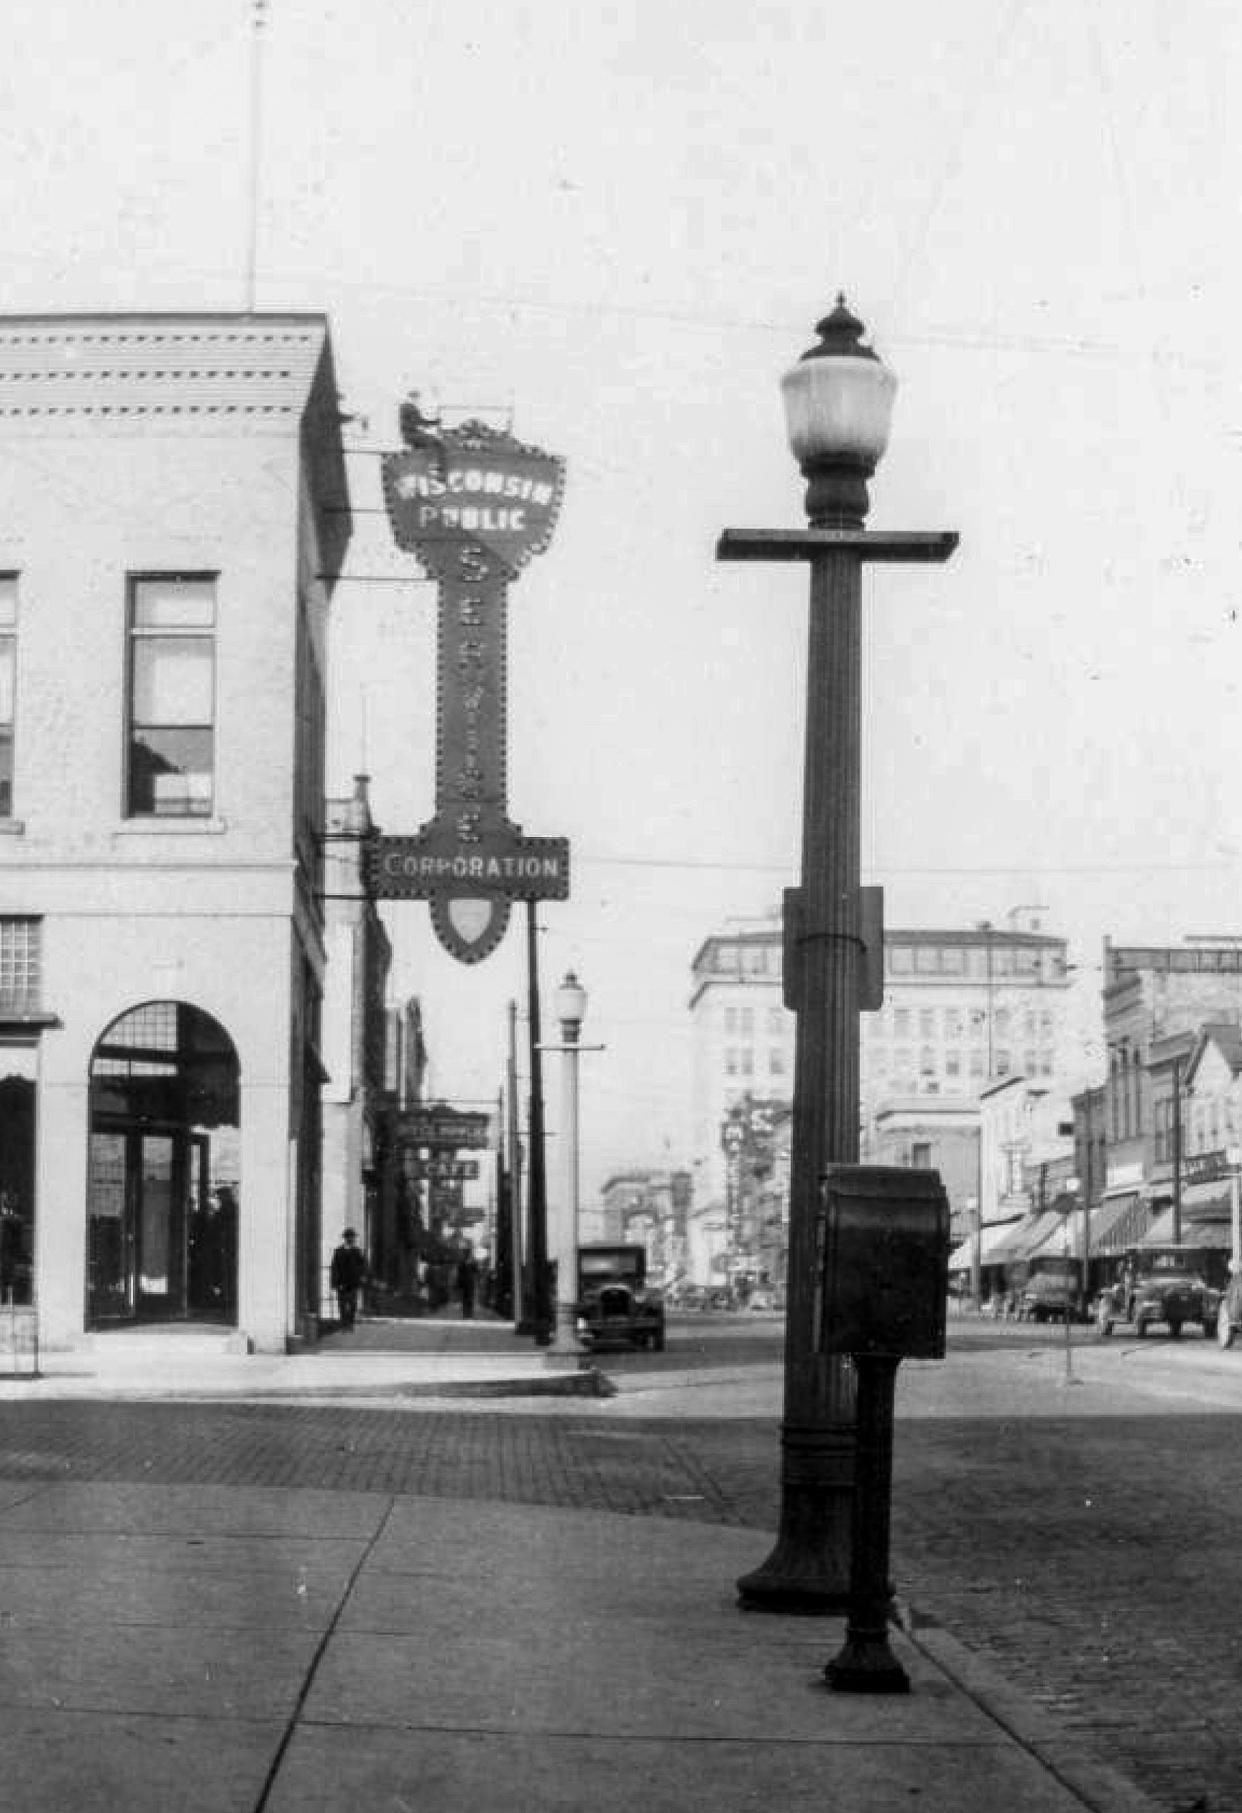 A street lamp at 8th and Pennsylvania sometime after 1924 in Sheboygan, Wis. The photo, which also shows the brick streets the city had, illustrates the home for Wisconsin Public Service at the time.